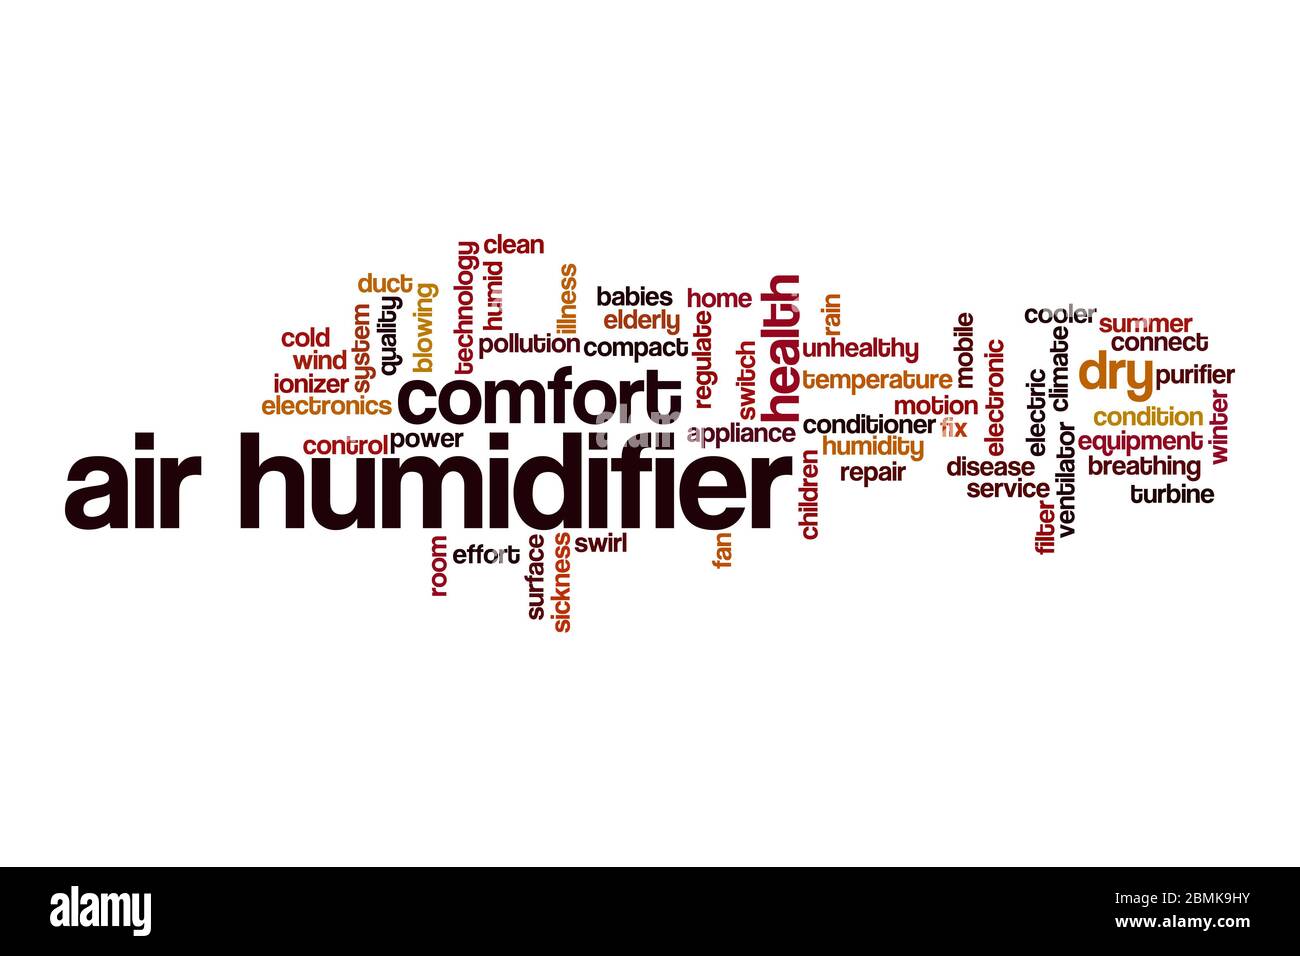 Air humidifier word cloud concept on white background Stock Photo